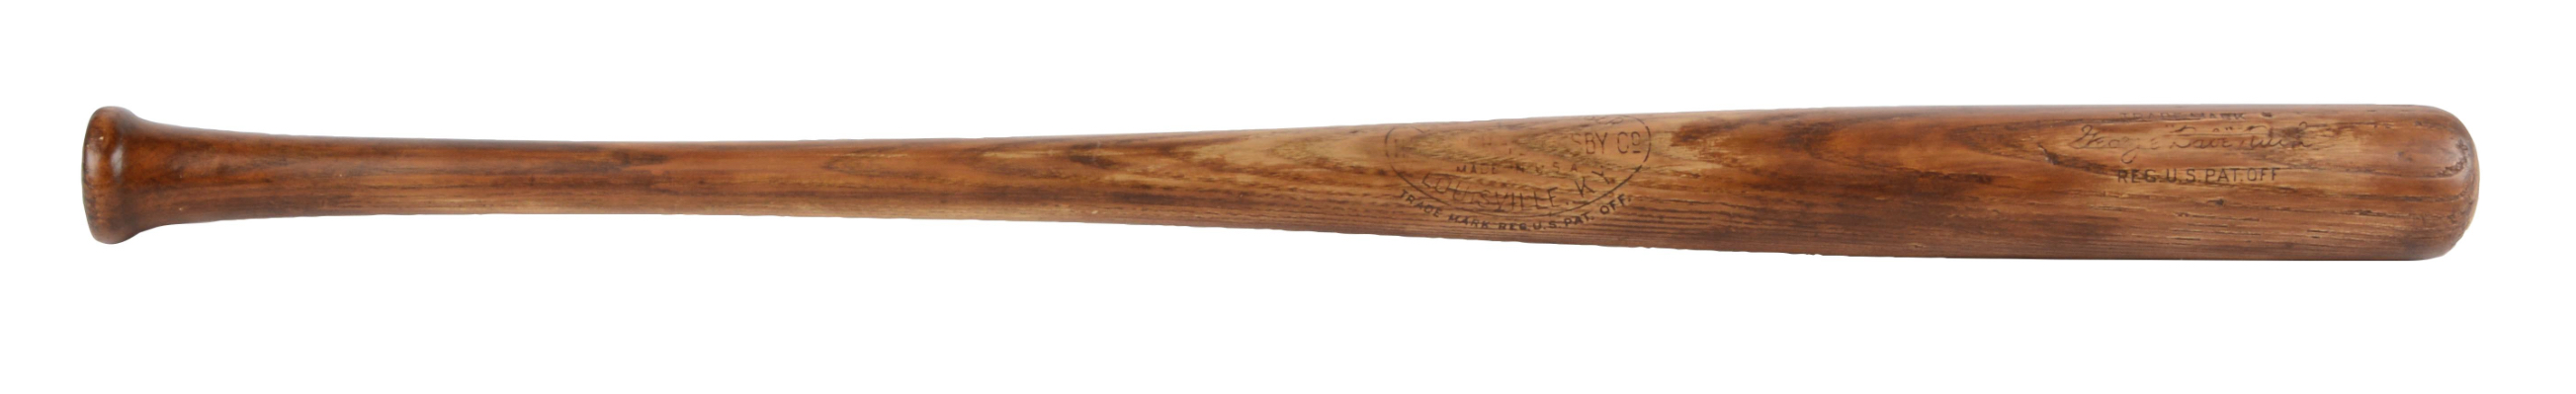 1925-1926 George "Babe" Ruth Professional Model Game Used Bat, estimated at $35,000-50,000.